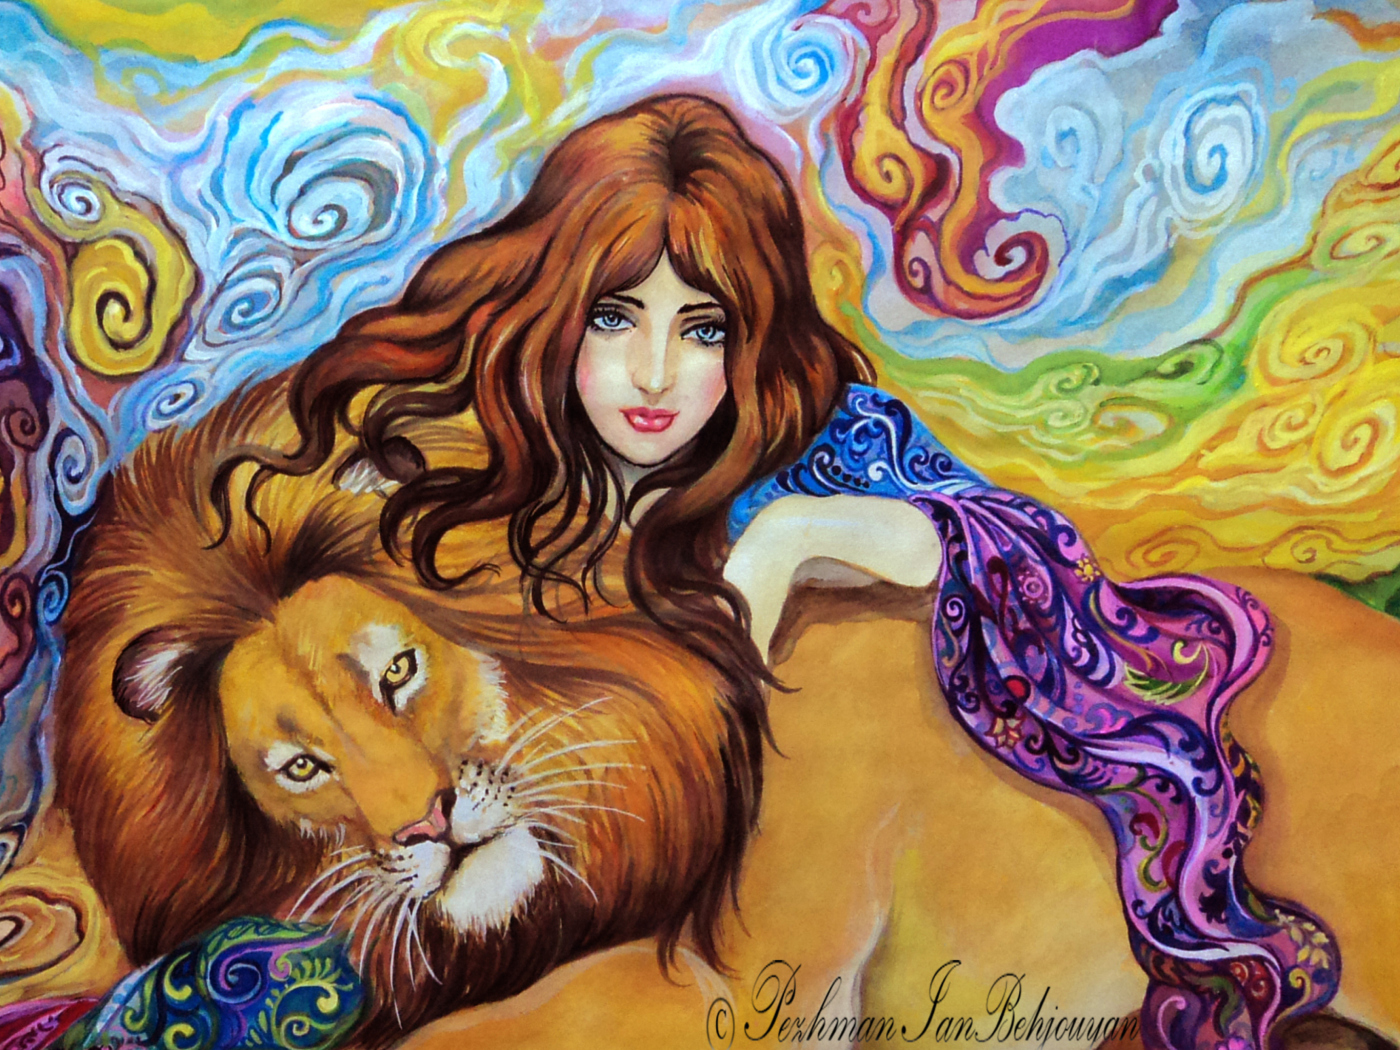 Girl And Lion Painting wallpaper 1400x1050